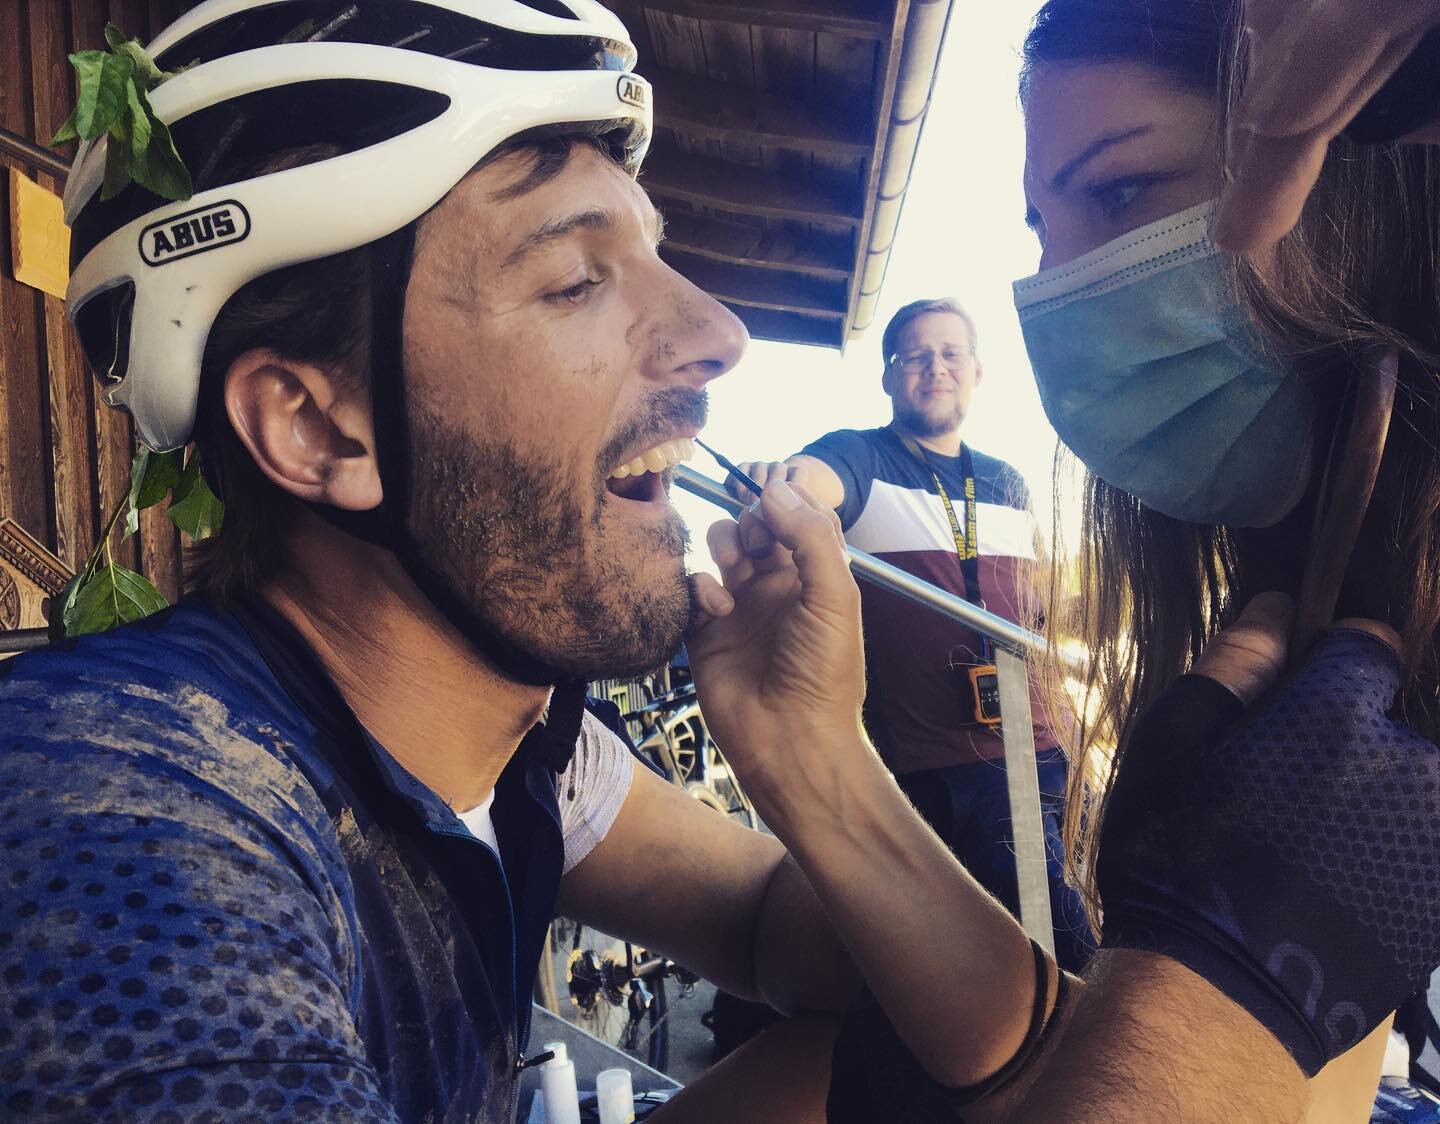 #behindthescenes with @fabian_cancellara and @samcamfilm for @baslerkantonalbank 

#makingof #shots are always the most funny ones 😅 especially this look in my face🤣 #pure #concentration 

#mask #maskenbildner #makeupartist #cleanbeauty #blacktooth